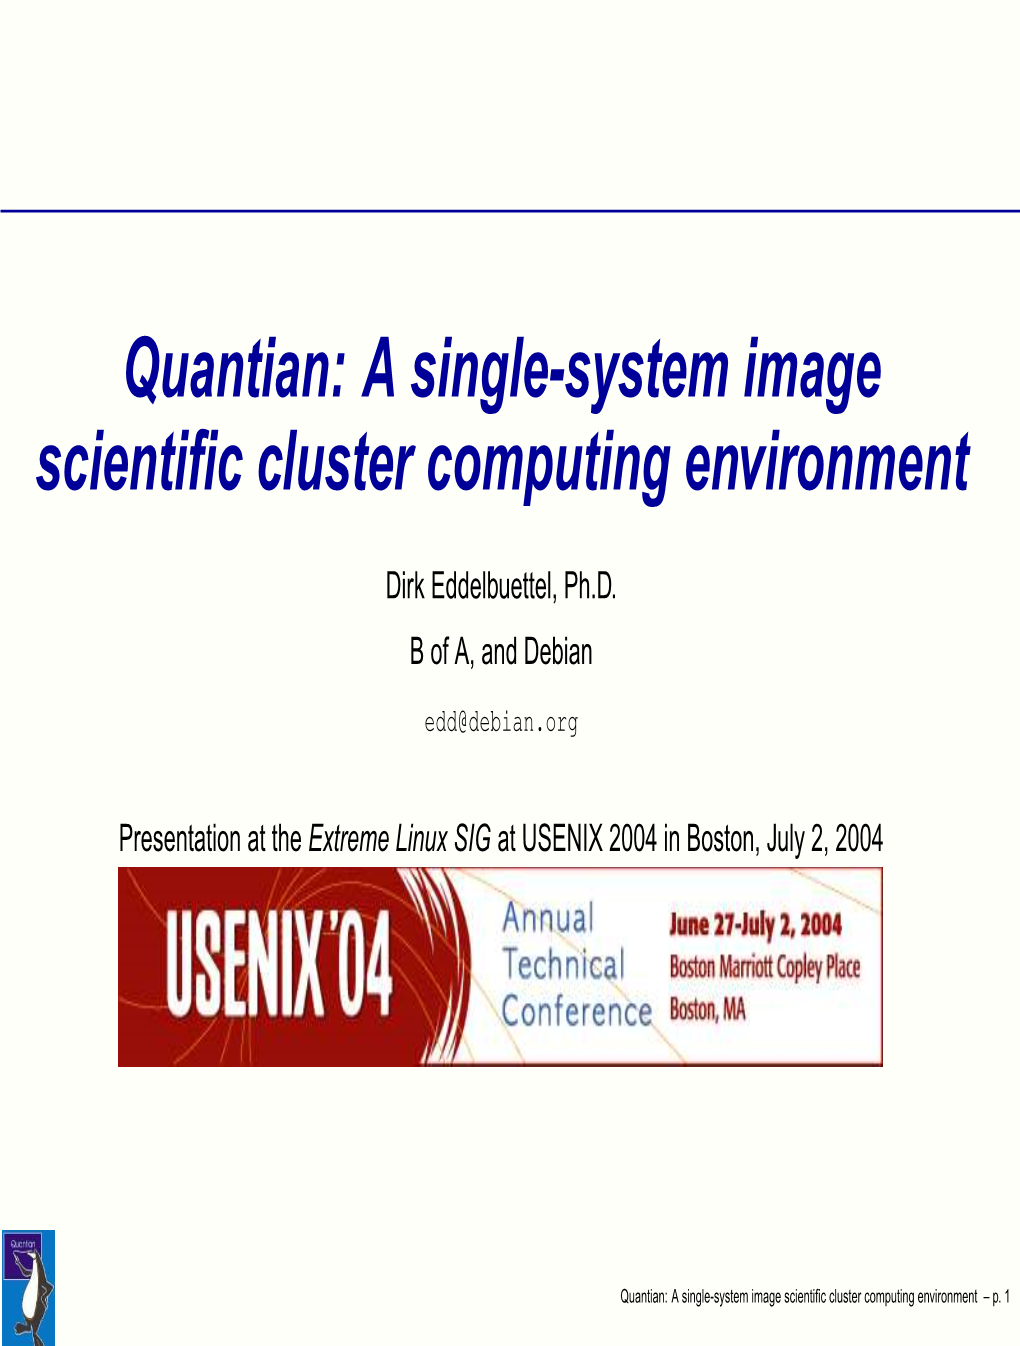 Quantian: a Single-System Image Scientific Cluster Computing